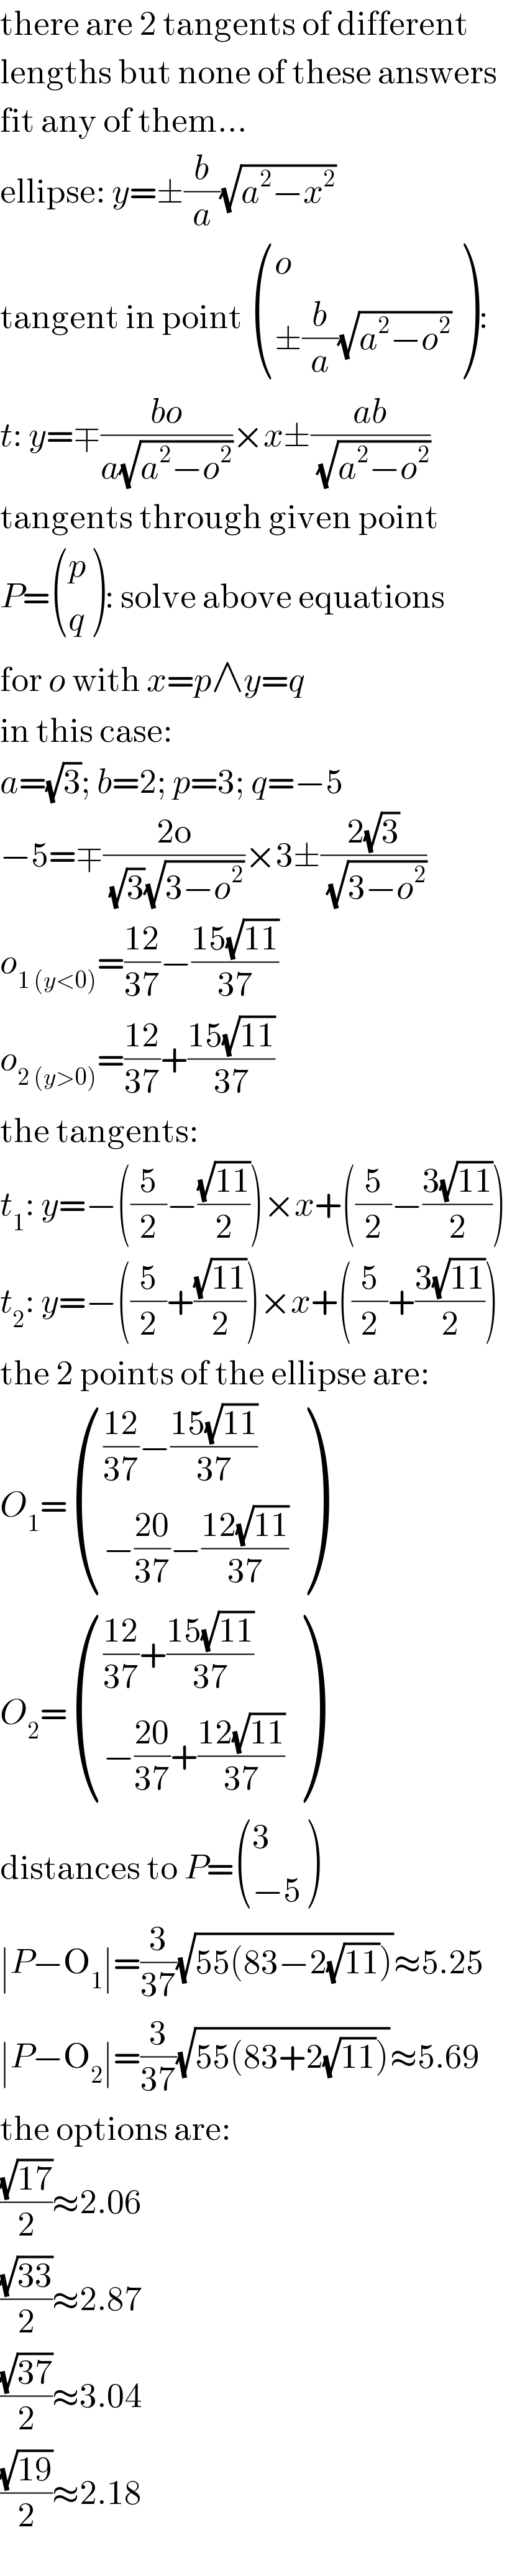 there are 2 tangents of different  lengths but none of these answers  fit any of them...  ellipse: y=±(b/a)(√(a^2 −x^2 ))  tangent in point  ((o),((±(b/a)(√(a^2 −o^2 )))) ):  t: y=∓((bo)/(a(√(a^2 −o^2 ))))×x±((ab)/(√(a^2 −o^2 )))  tangents through given point  P= ((p),(q) ): solve above equations  for o with x=p∧y=q  in this case:  a=(√3); b=2; p=3; q=−5  −5=∓((2o)/((√3)(√(3−o^2 ))))×3±((2(√3))/(√(3−o^2 )))  o_(1 (y<0)) =((12)/(37))−((15(√(11)))/(37))  o_(2 (y>0)) =((12)/(37))+((15(√(11)))/(37))  the tangents:  t_1 : y=−((5/2)−((√(11))/2))×x+((5/2)−((3(√(11)))/2))  t_2 : y=−((5/2)+((√(11))/2))×x+((5/2)+((3(√(11)))/2))  the 2 points of the ellipse are:  O_1 = (((((12)/(37))−((15(√(11)))/(37)))),((−((20)/(37))−((12(√(11)))/(37)))) )  O_2 = (((((12)/(37))+((15(√(11)))/(37)))),((−((20)/(37))+((12(√(11)))/(37)))) )  distances to P= ((3),((−5)) )  ∣P−O_1 ∣=(3/(37))(√(55(83−2(√(11)))))≈5.25  ∣P−O_2 ∣=(3/(37))(√(55(83+2(√(11)))))≈5.69  the options are:  ((√(17))/2)≈2.06  ((√(33))/2)≈2.87  ((√(37))/2)≈3.04  ((√(19))/2)≈2.18  